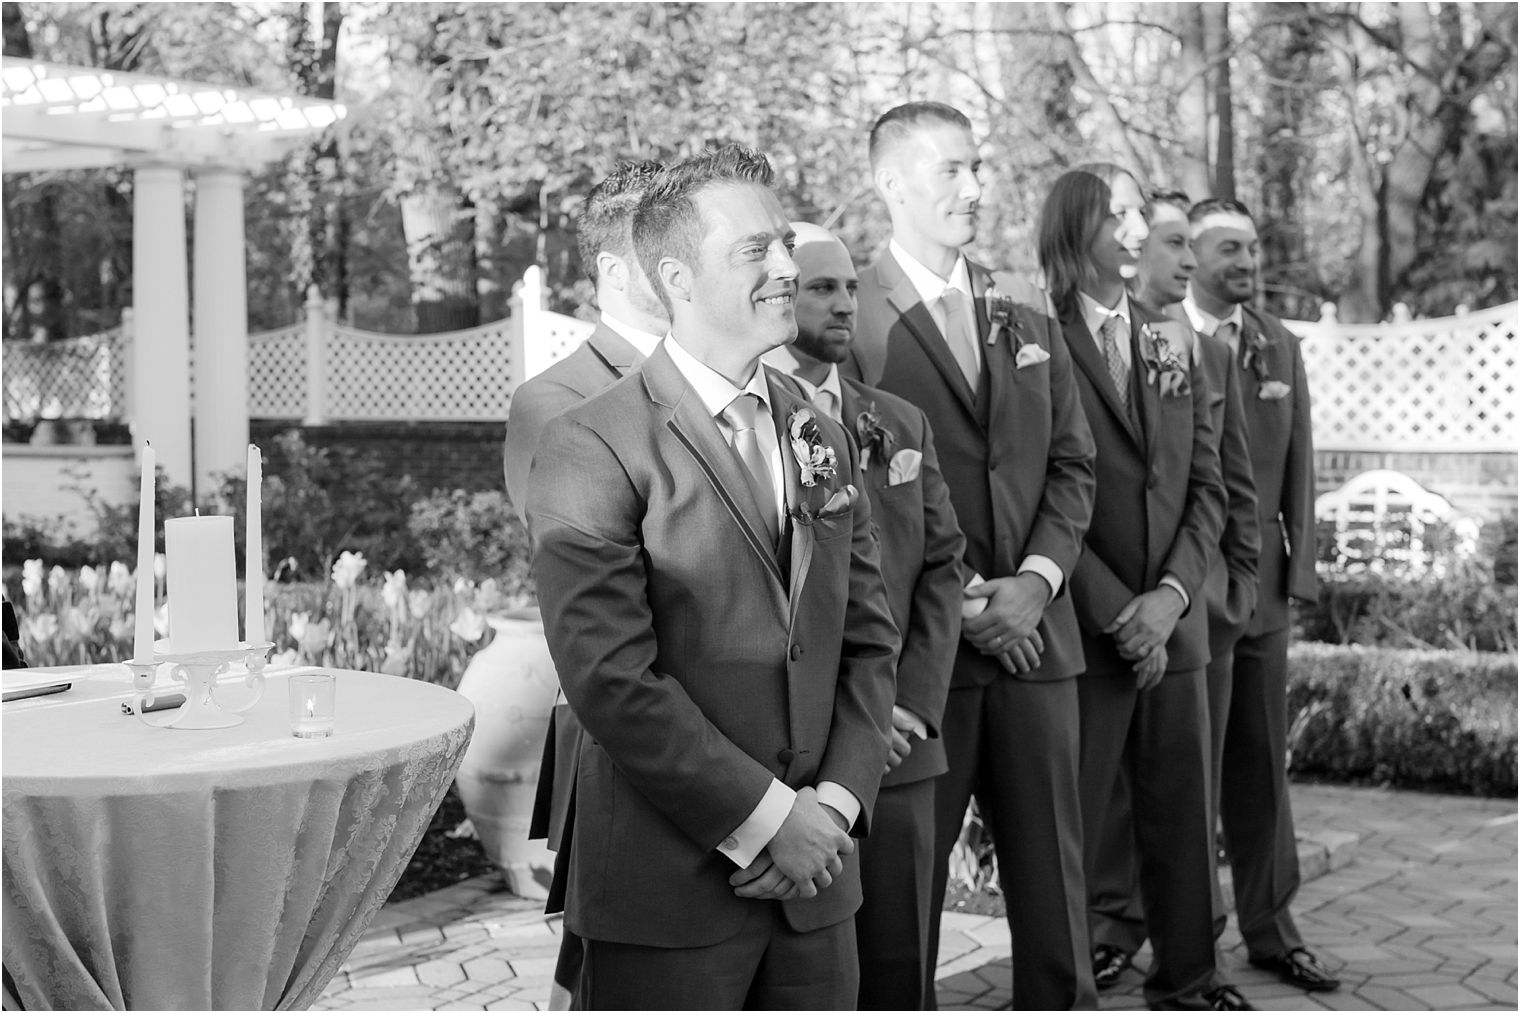 Groom photo at the ceremony